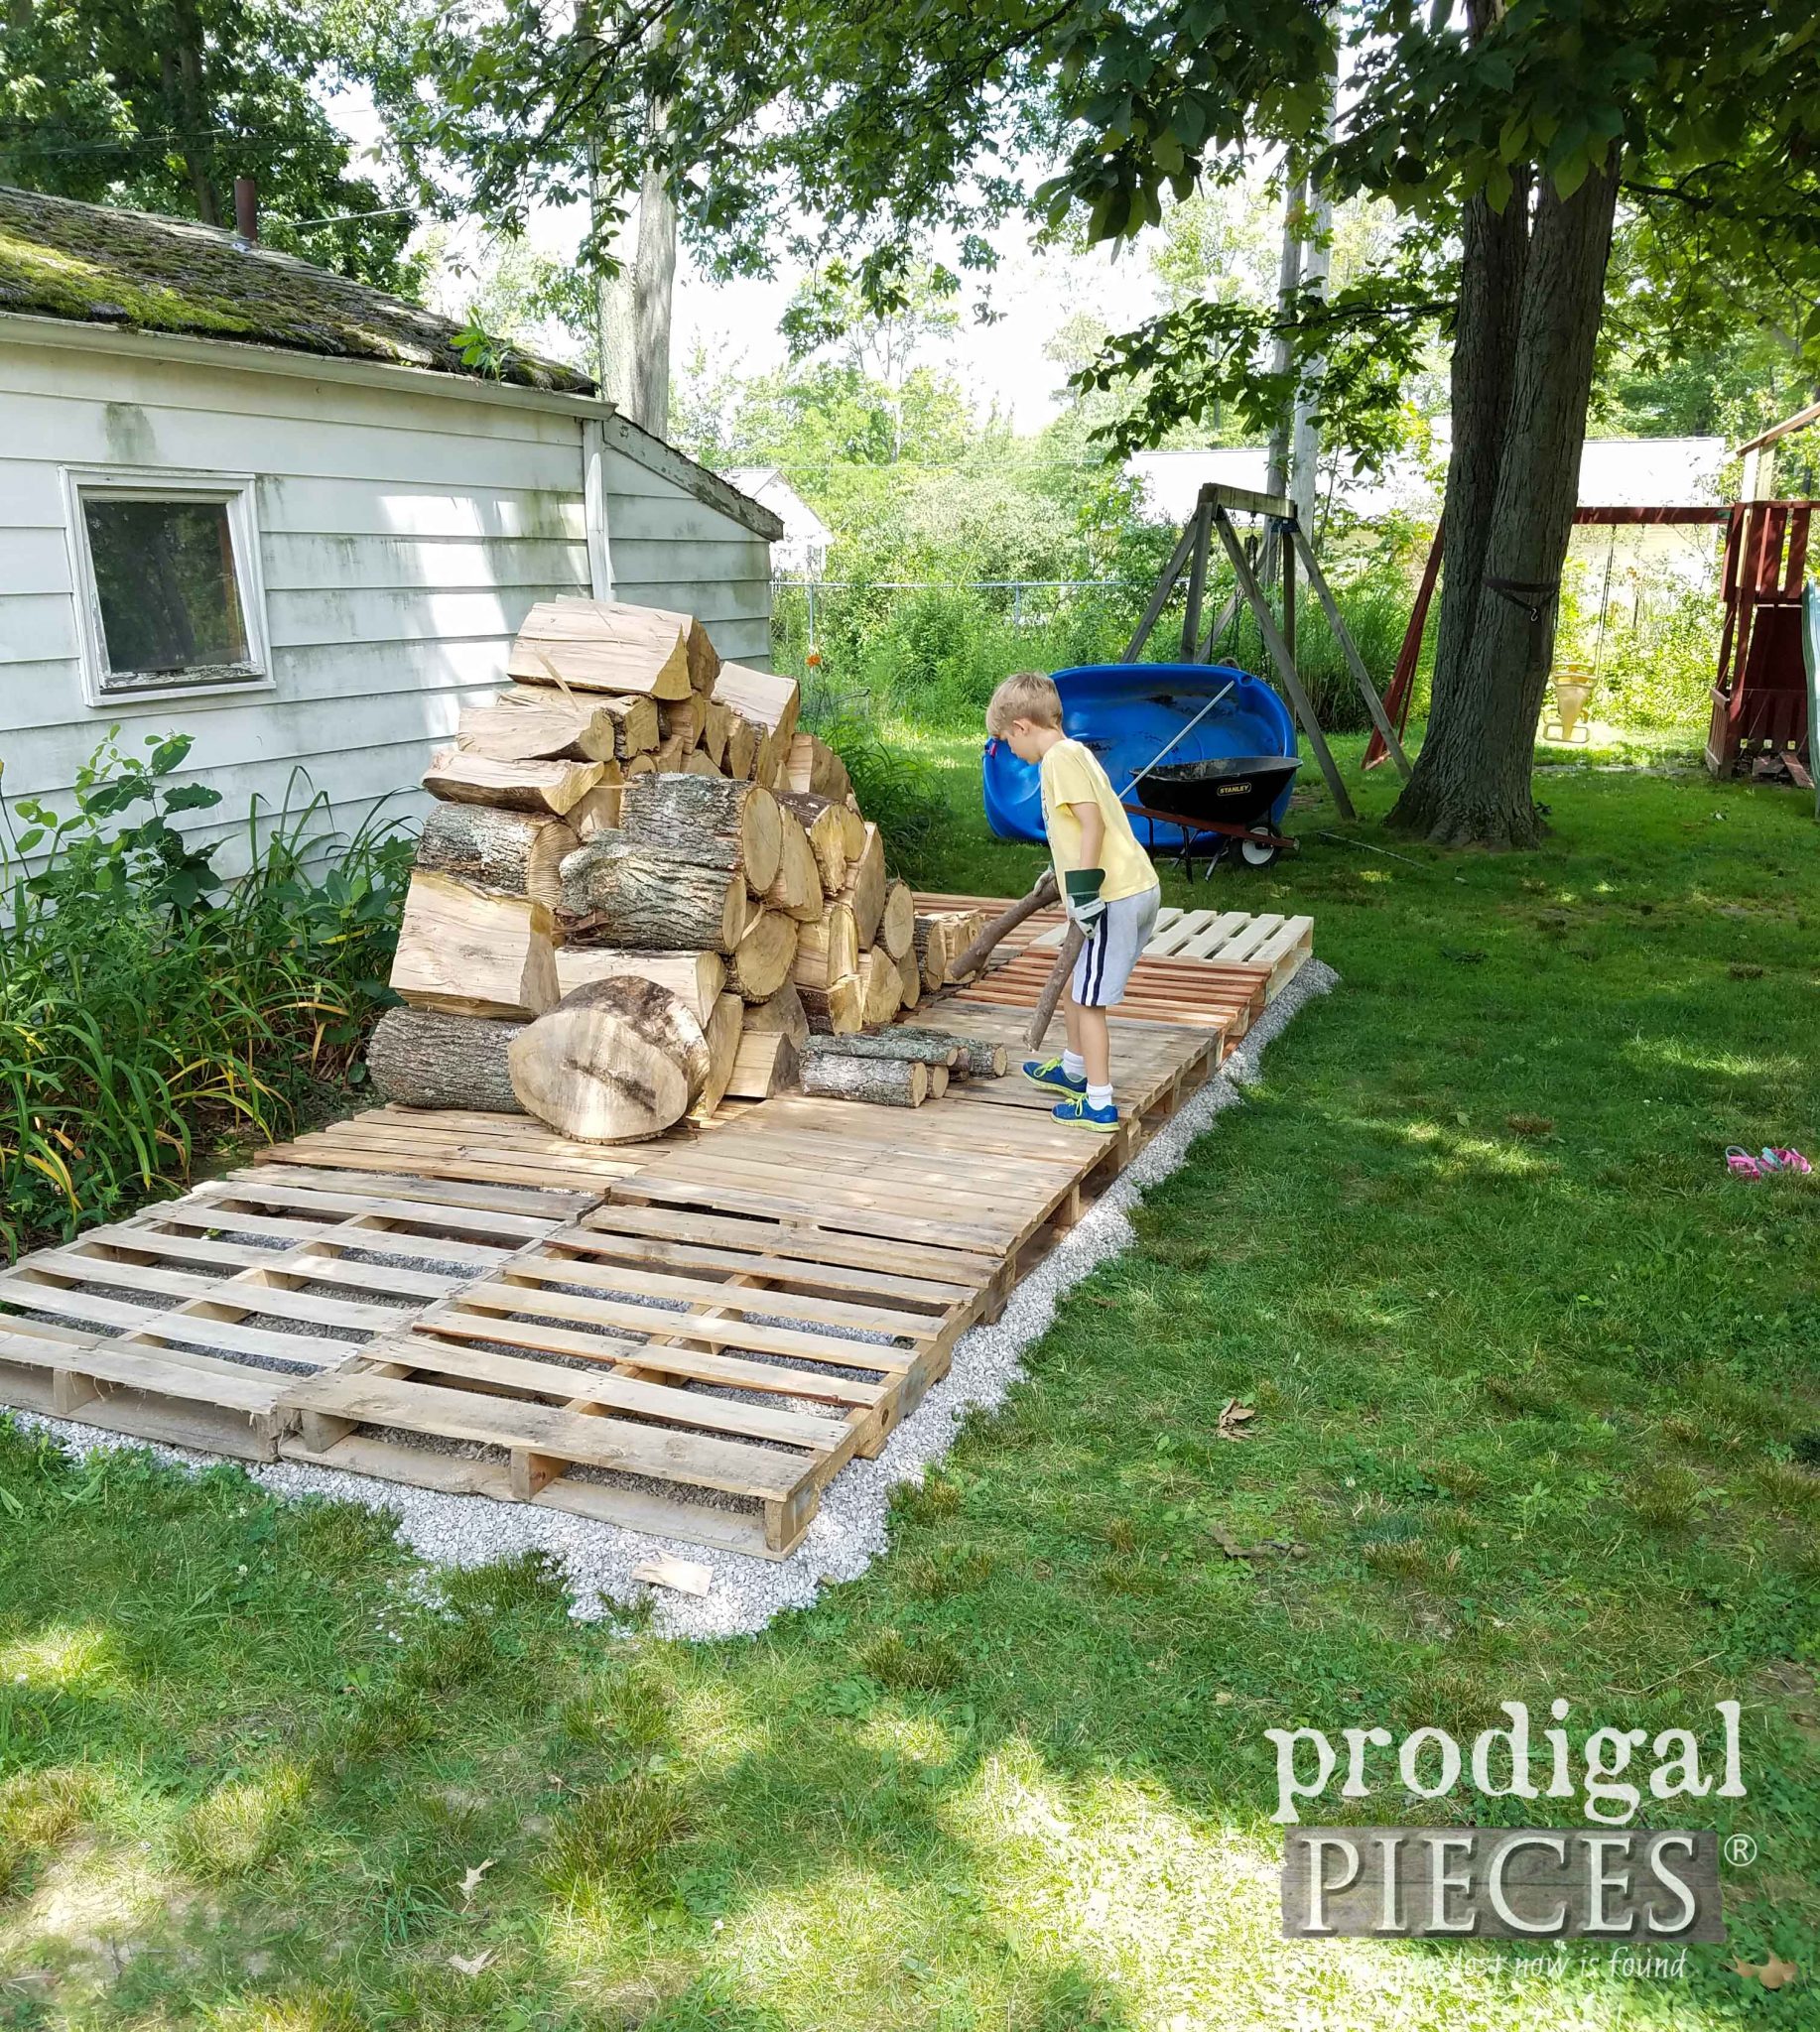 Beginning of Wood Shed | prodigalpieces.com